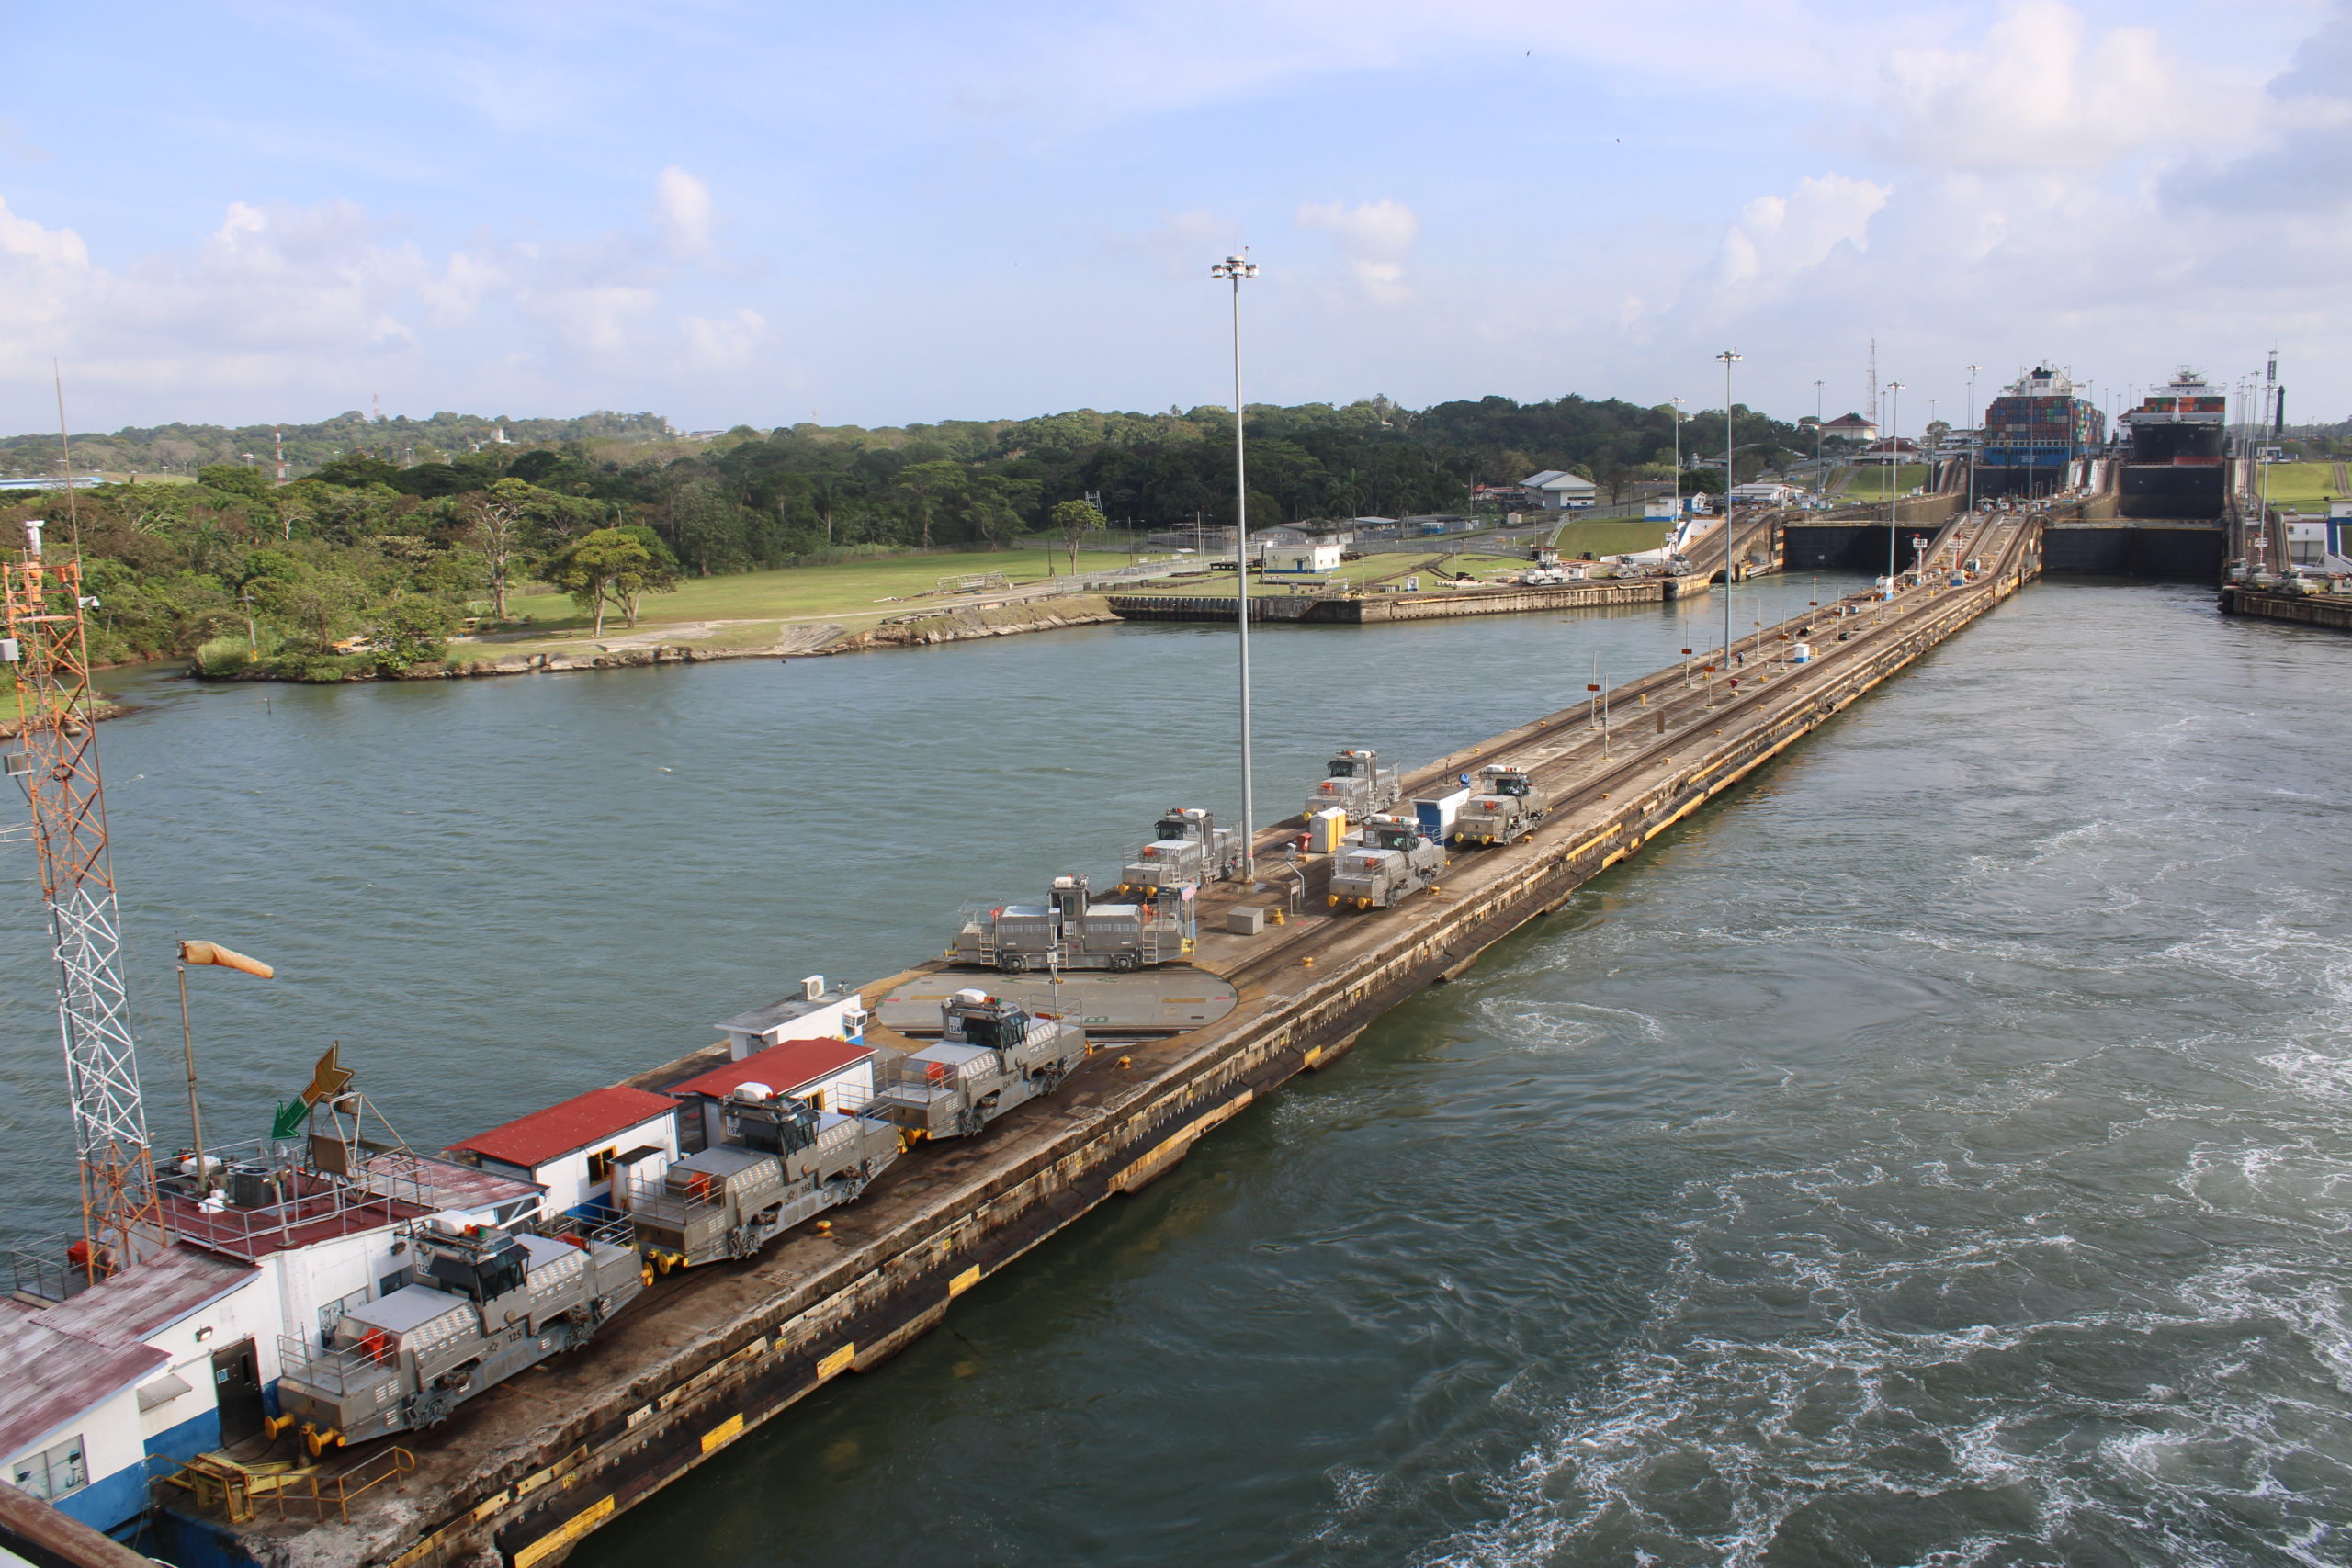 Mules of the Panama Canal